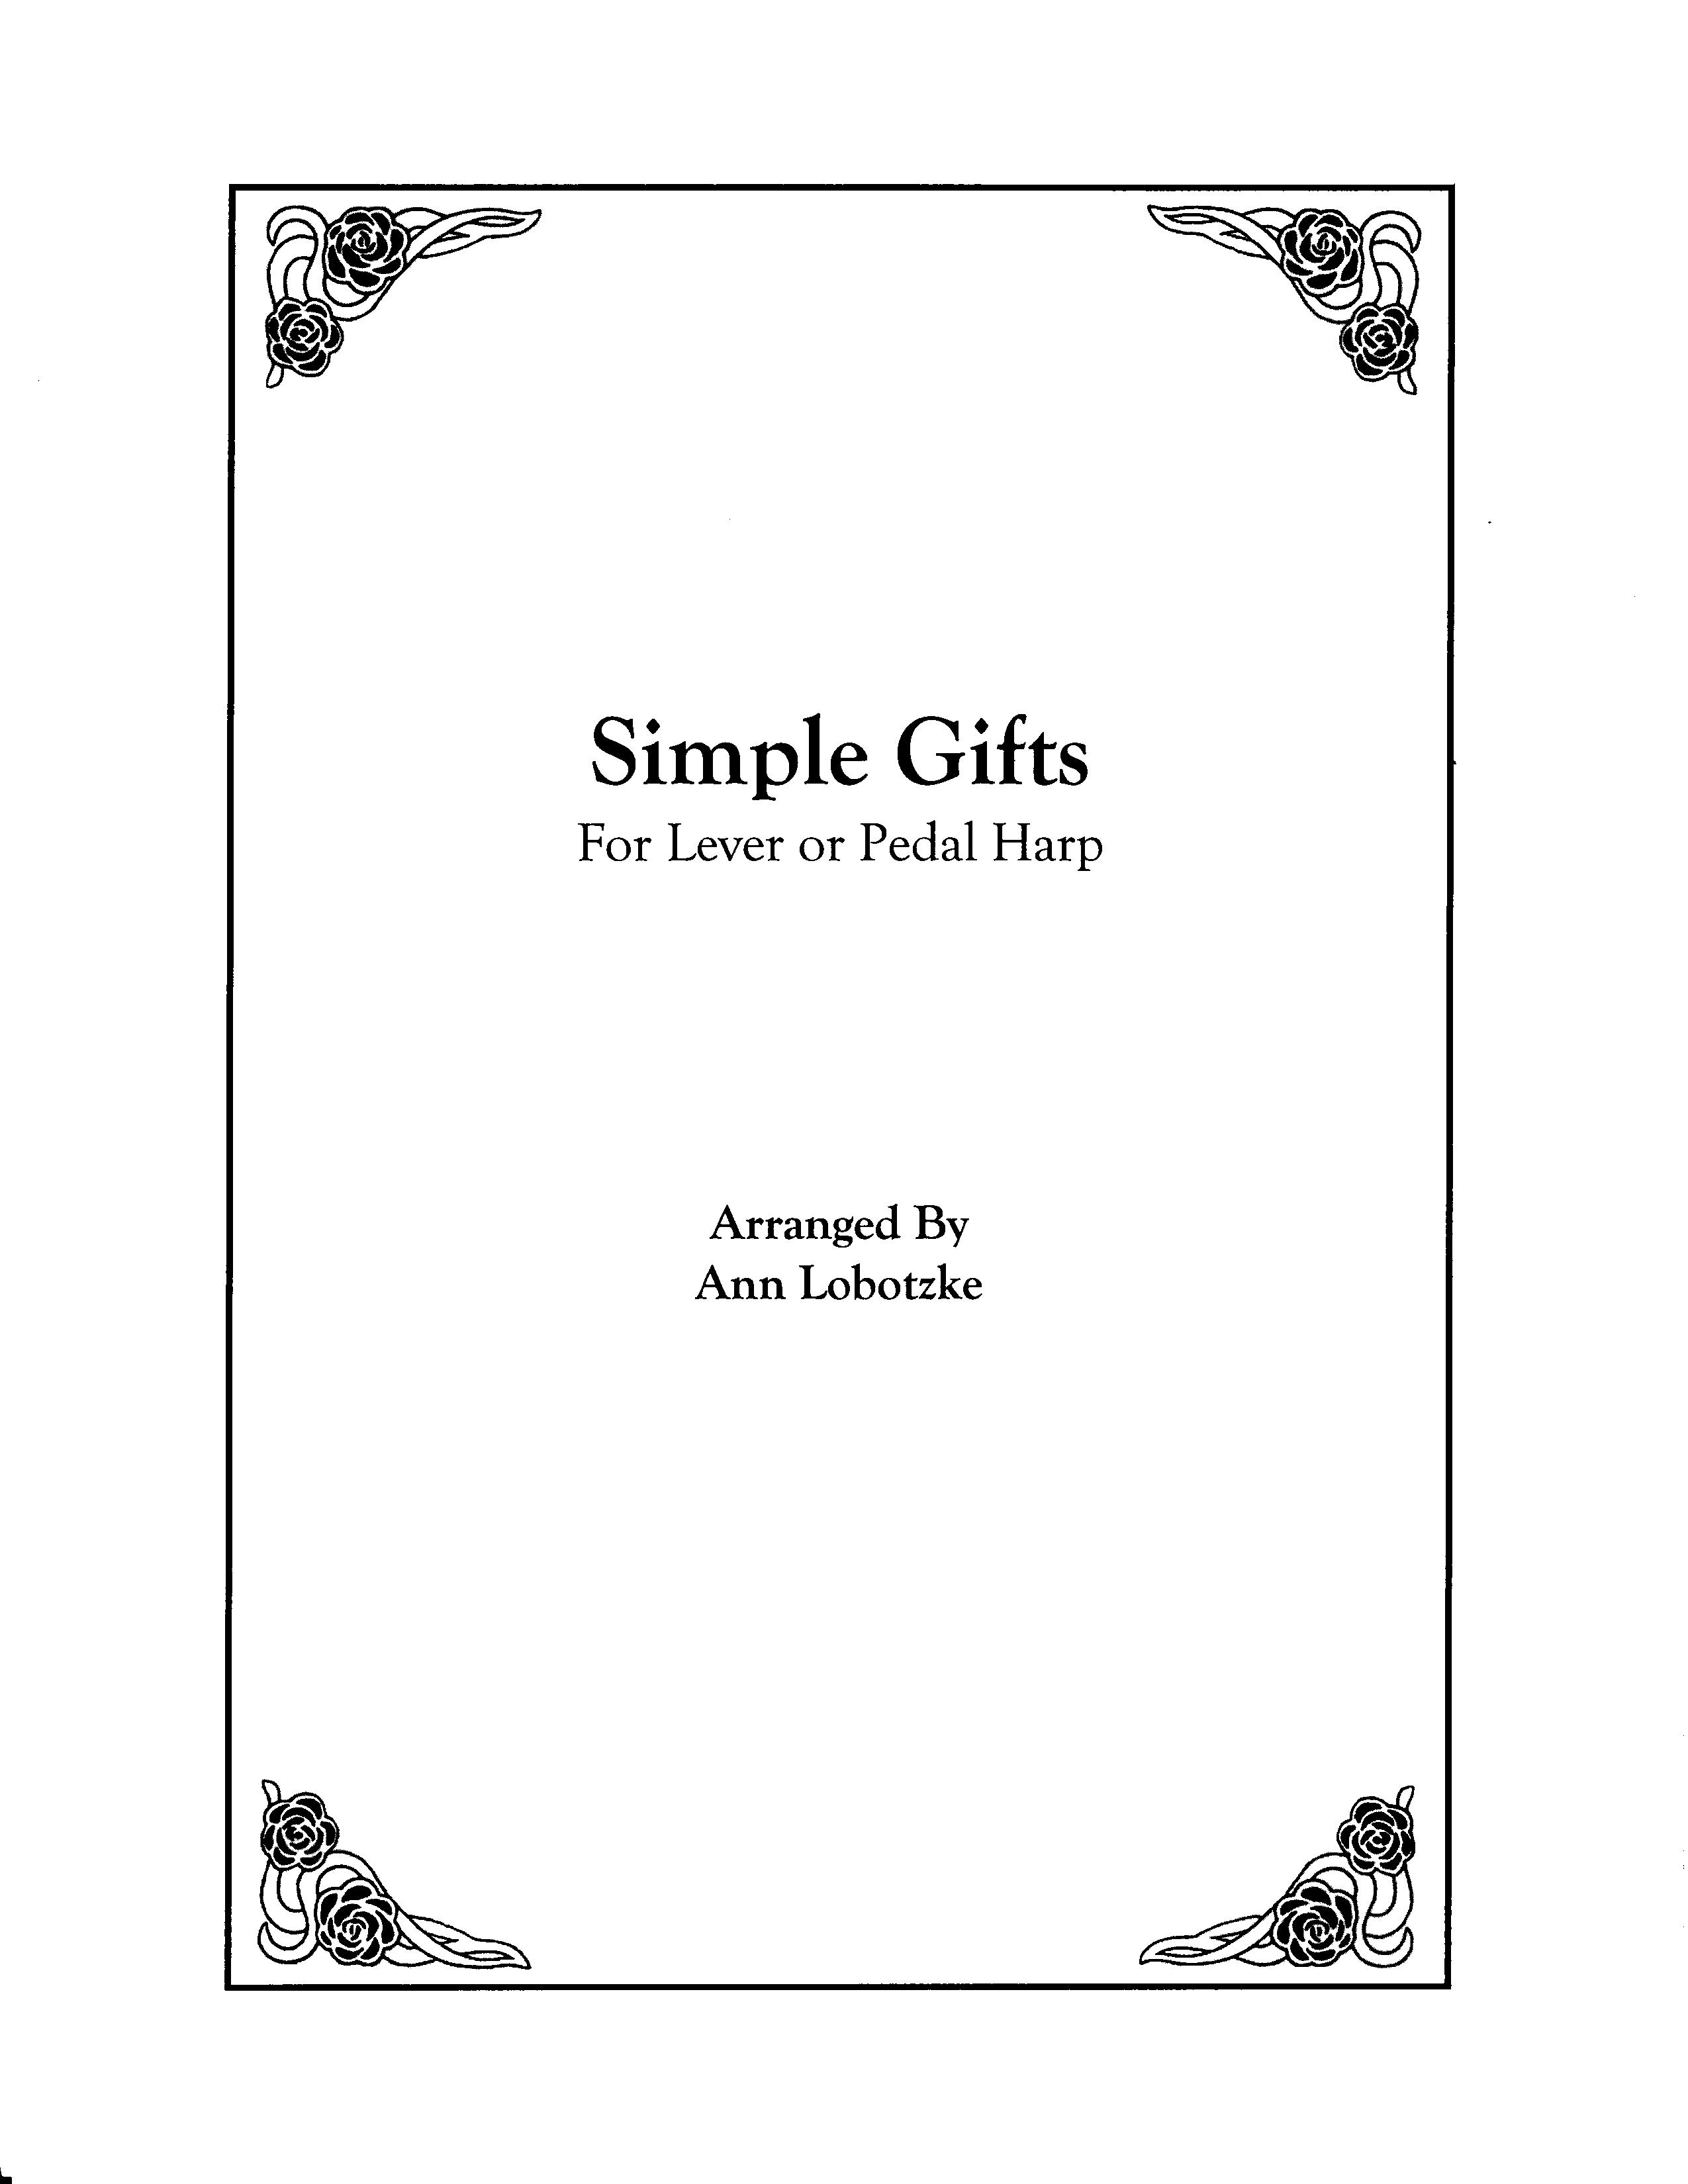 Simple Gifts - 